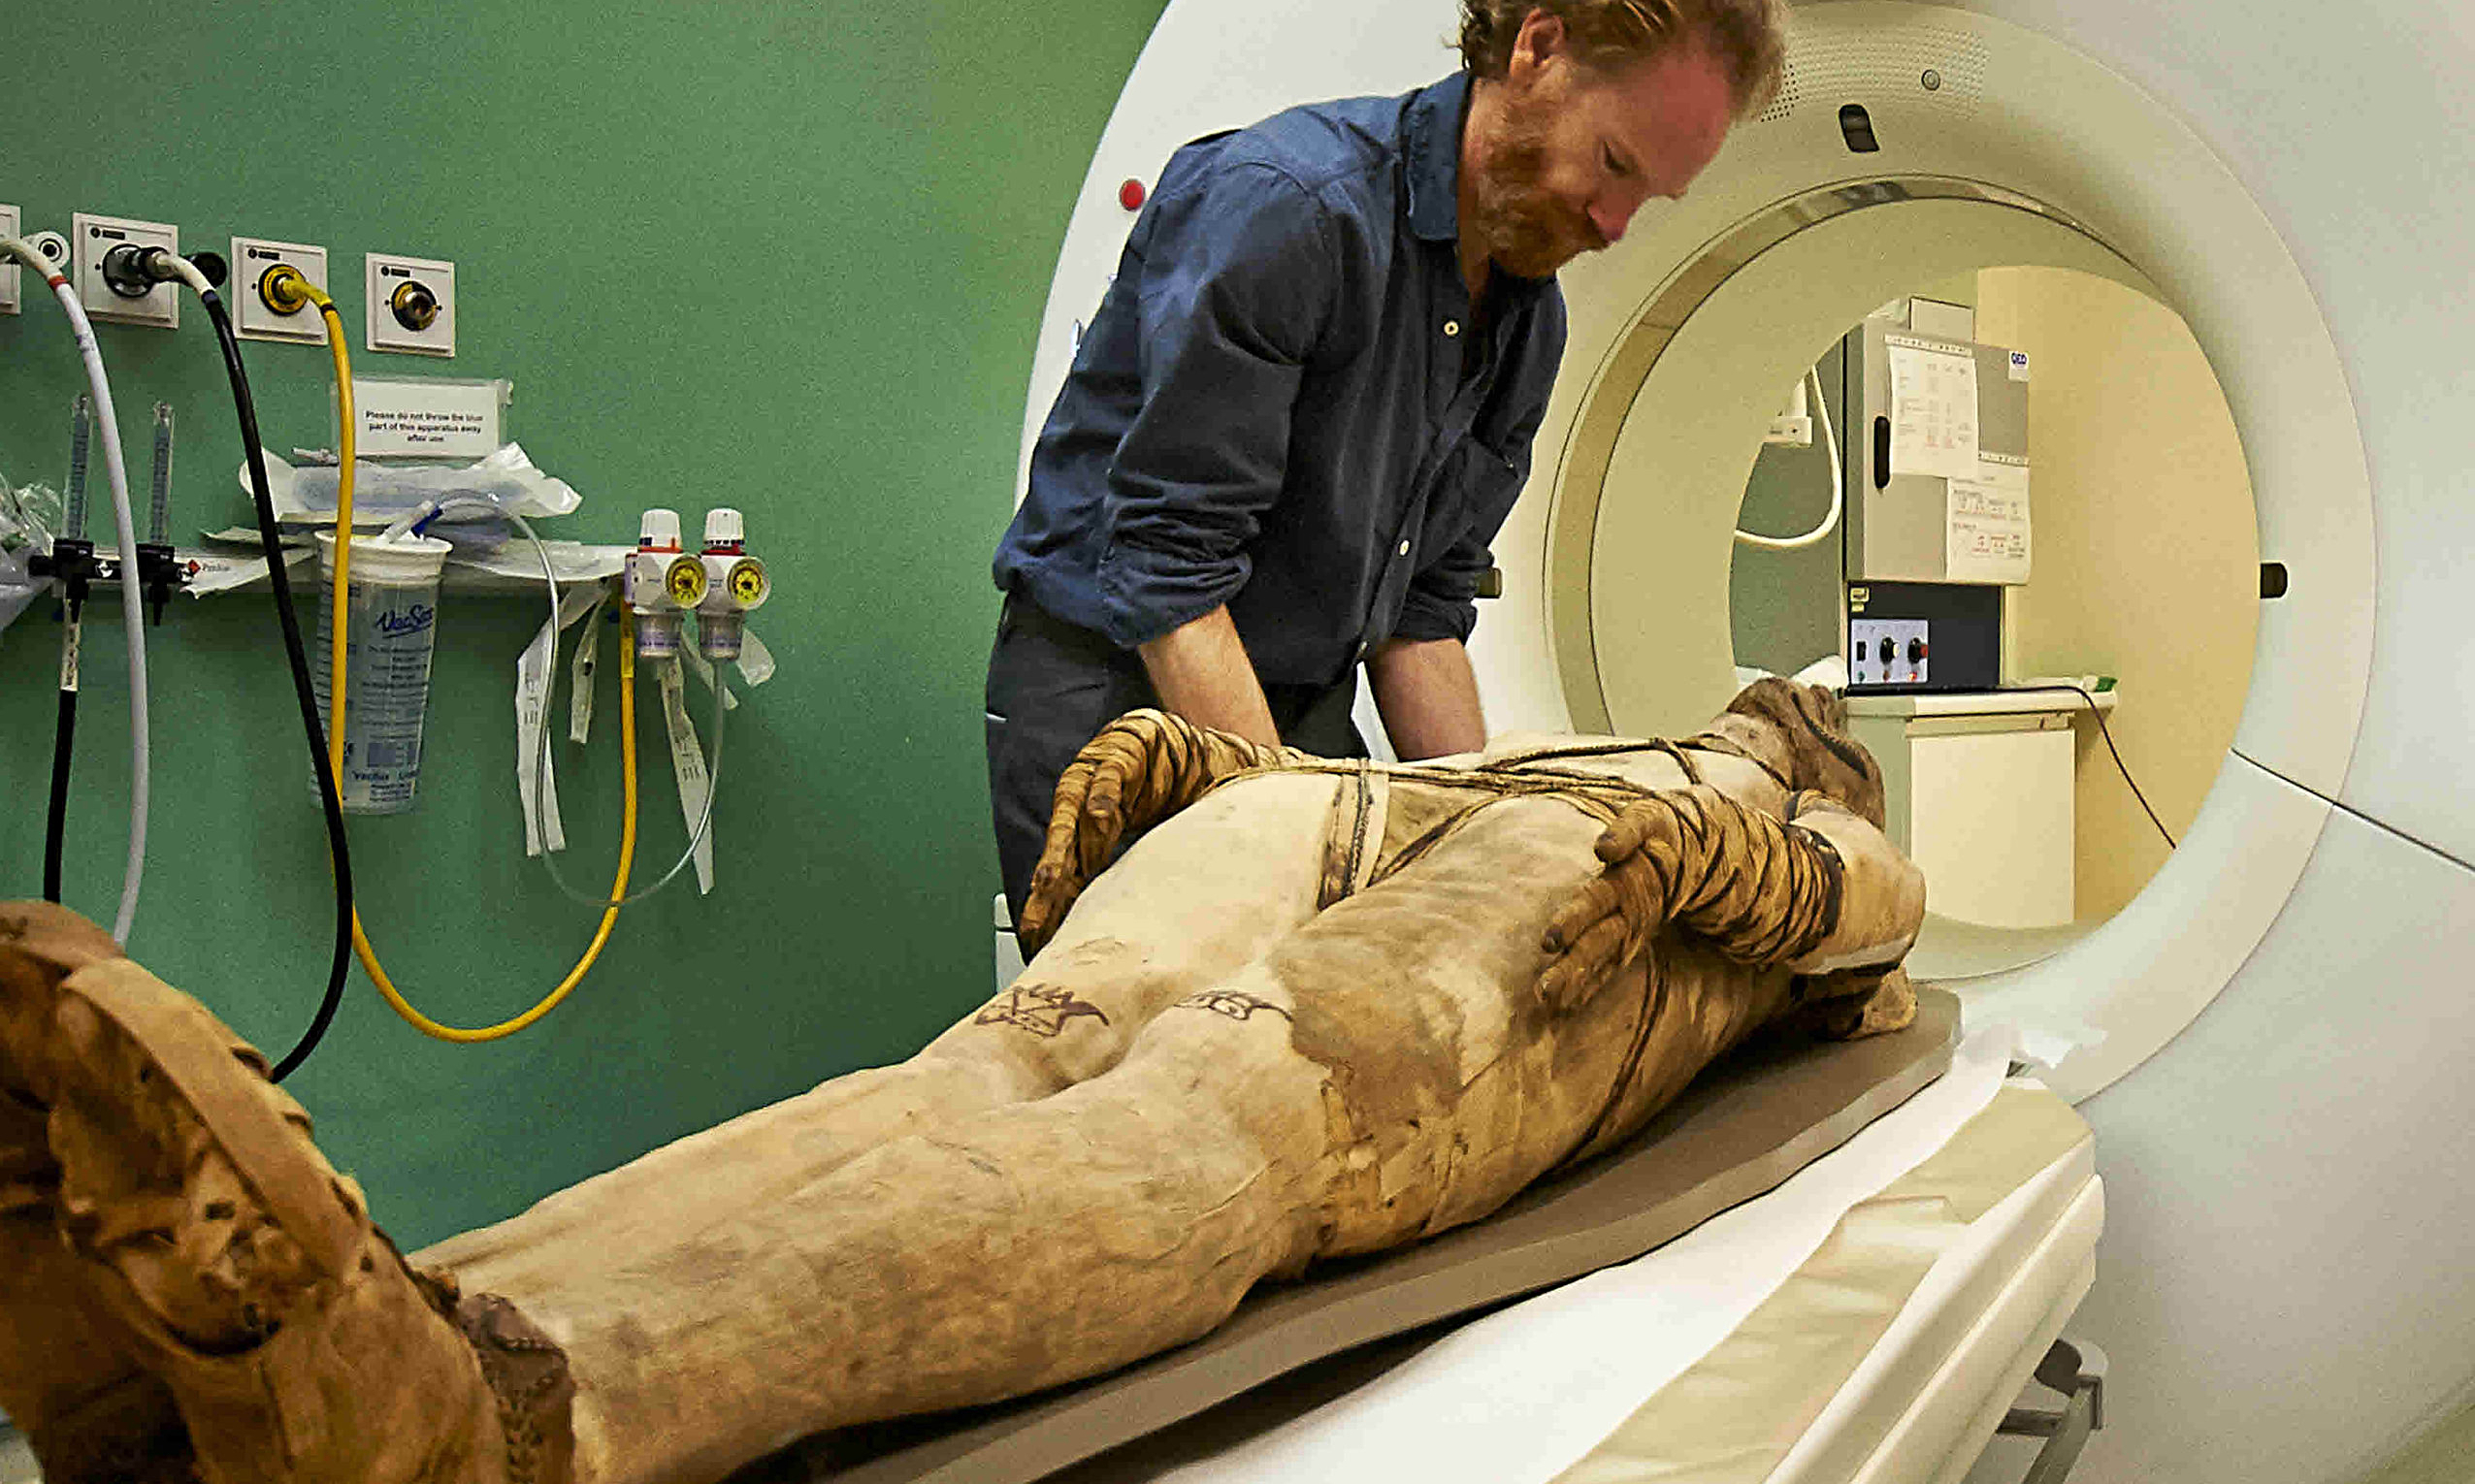 Inside The Mummies Embalmed Bodies Courtesy Of A Hospital Ct Scanner